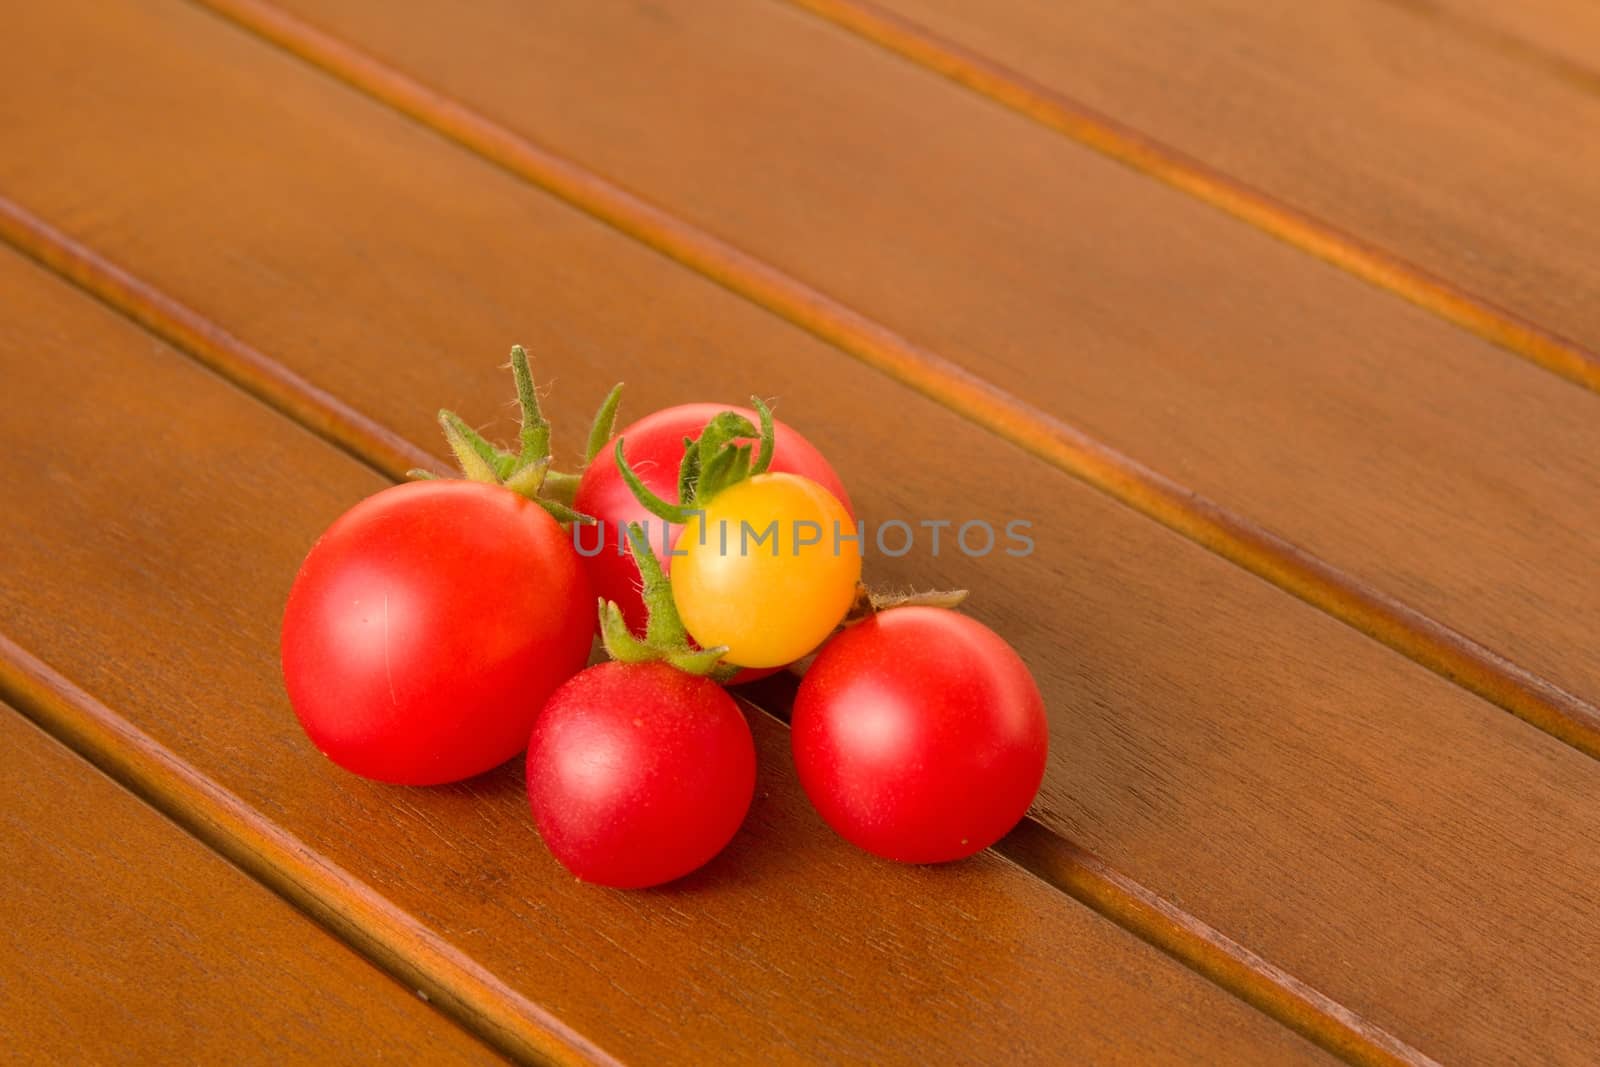 Colourful tomatoes on a table by Dermot68